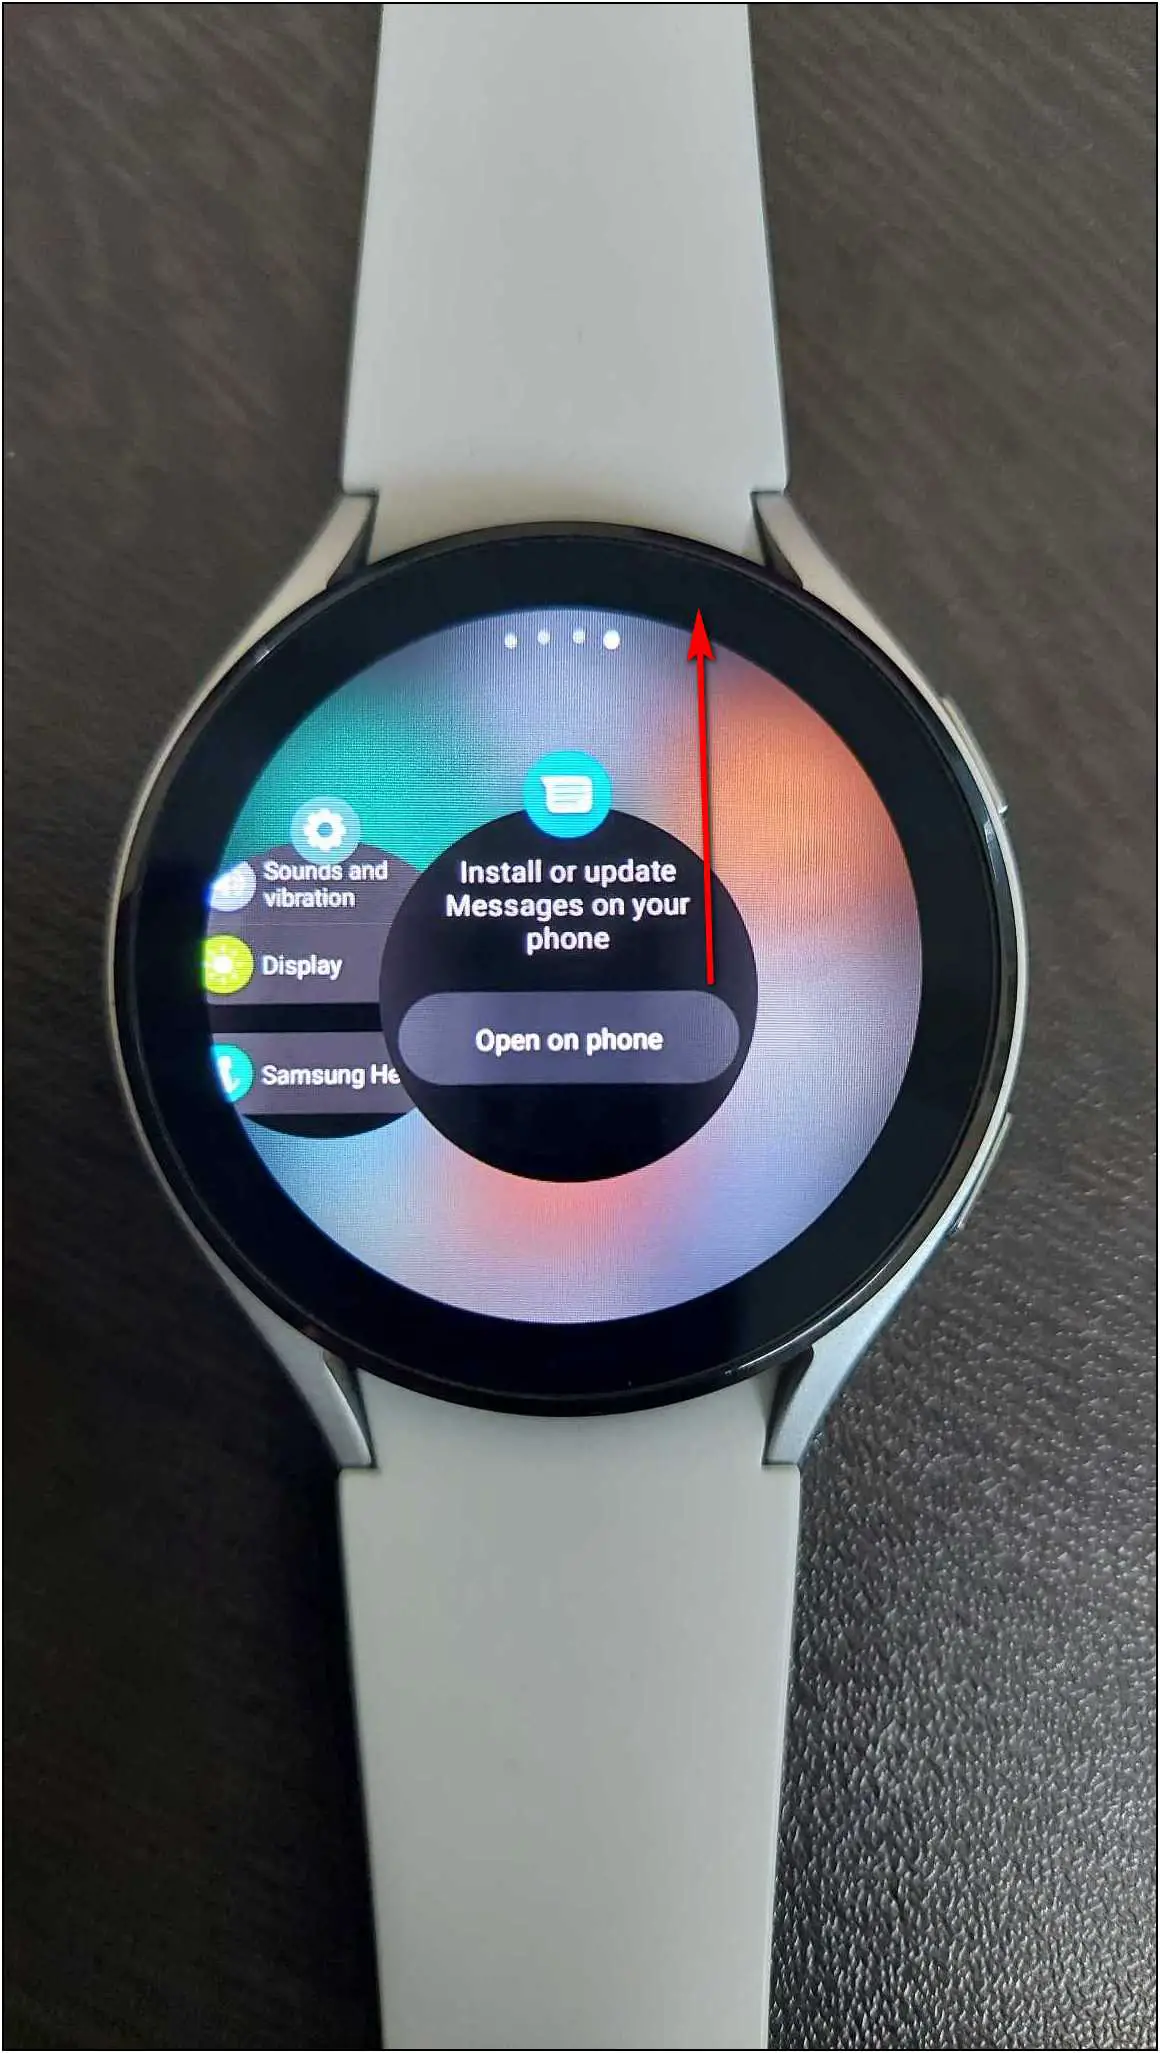 Clear Recent Apps to Save Battery Galaxy Watch 4